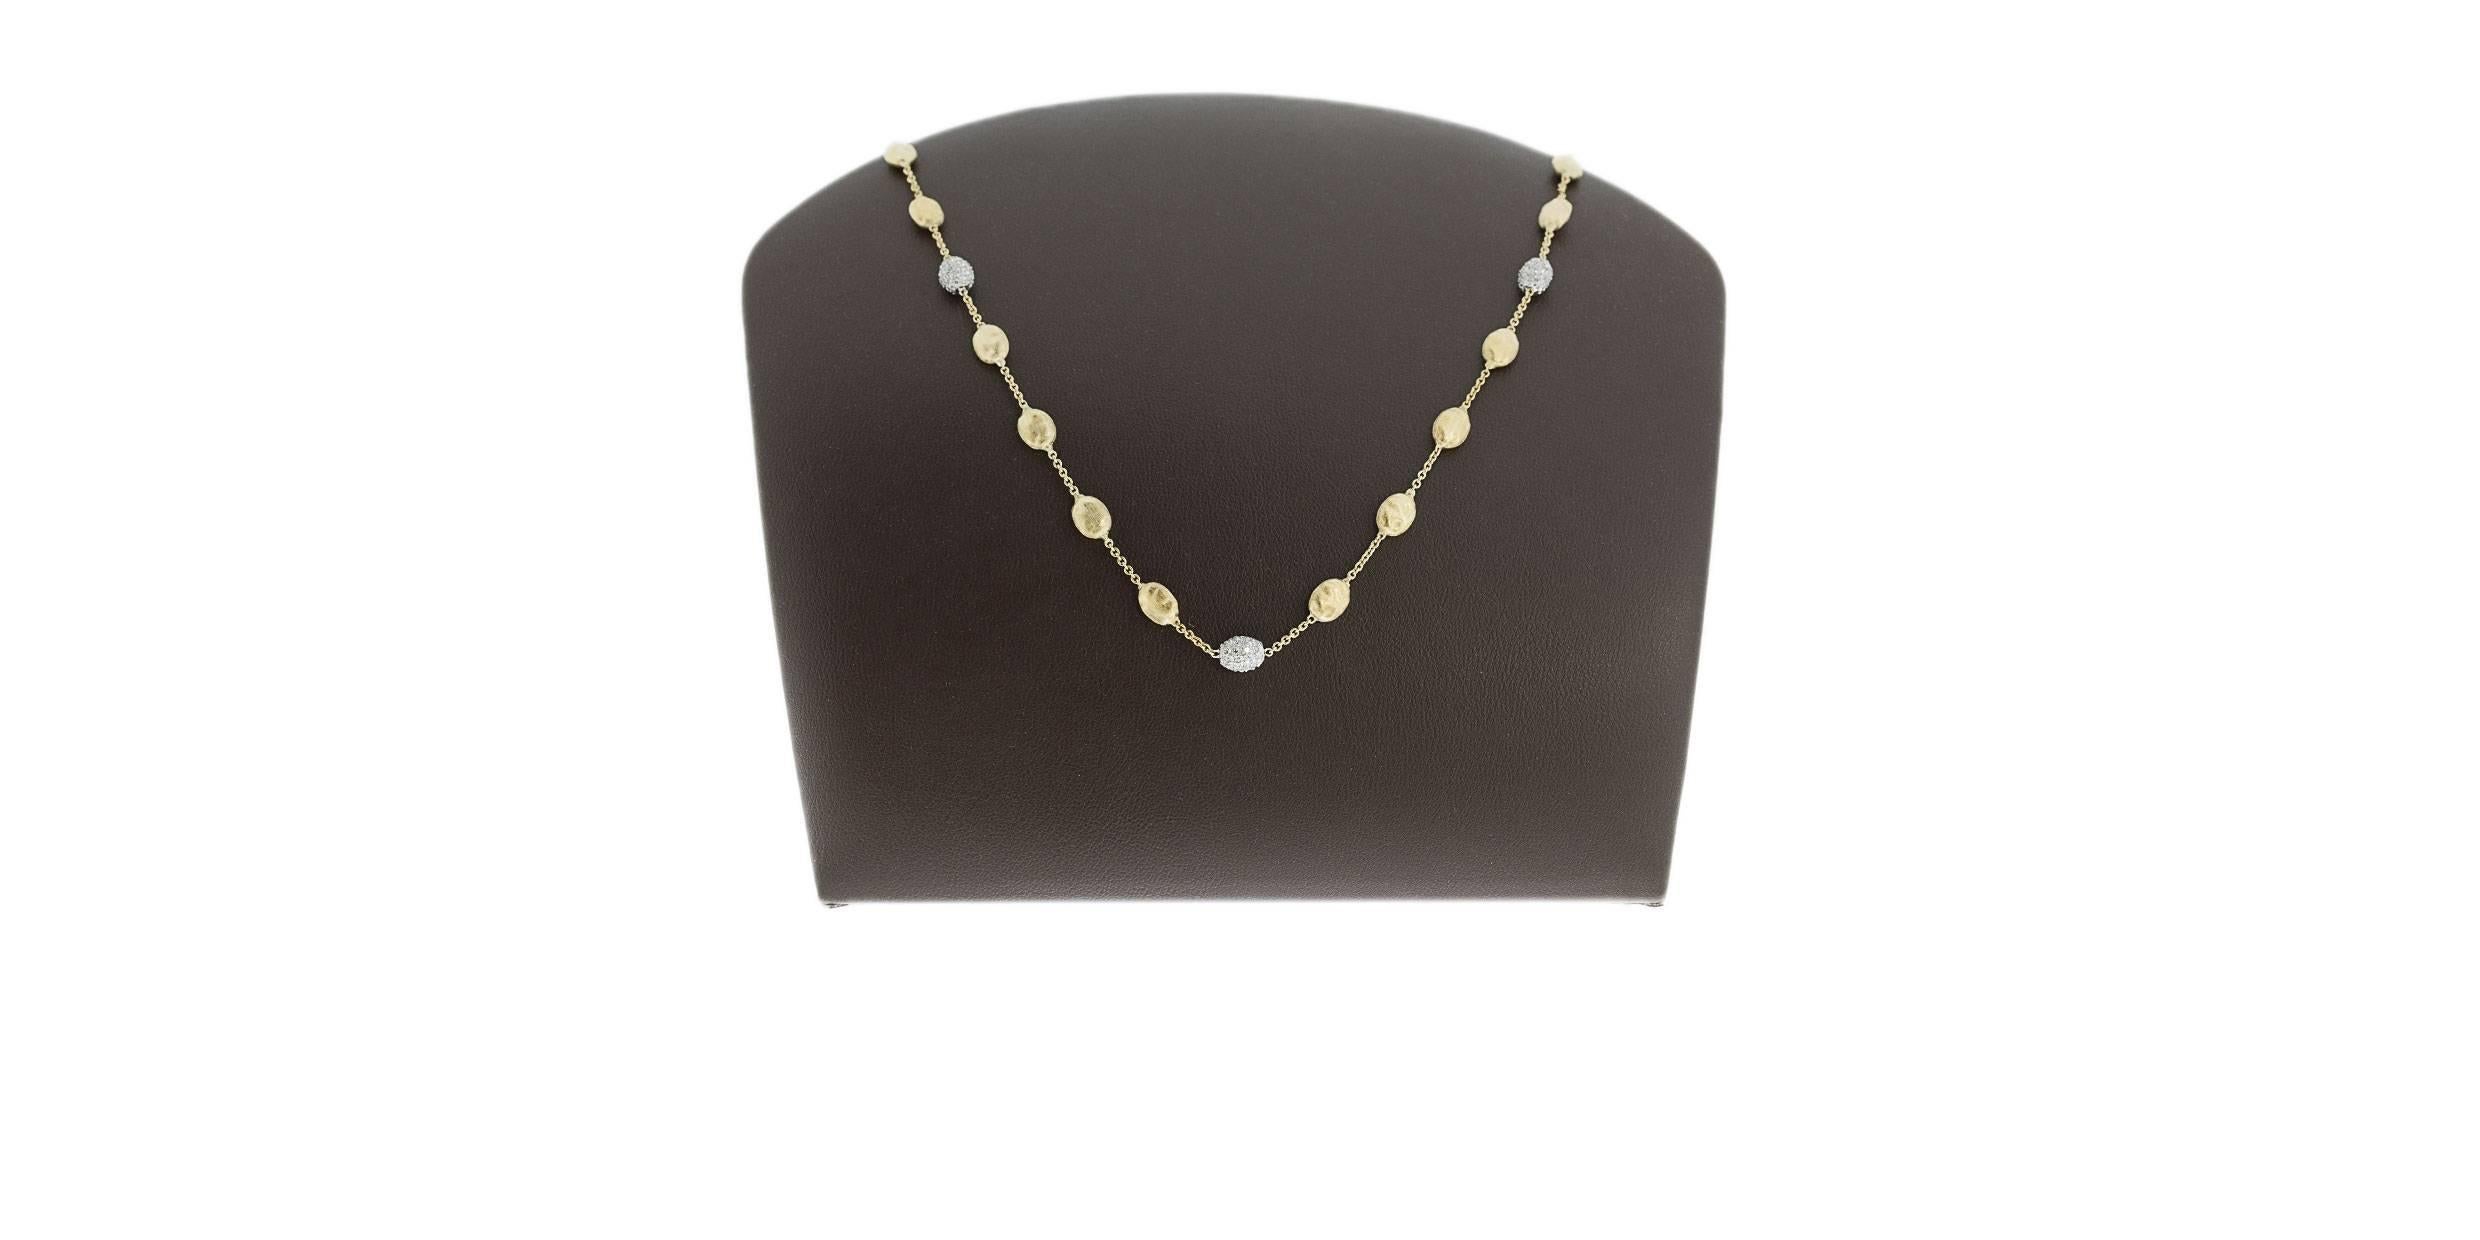 Add some drama to your wardrobe with this beautiful Marco Bicego necklace from the Siviglia collection. This station necklace is comprised of 18 karat yellow gold and features oval shapes that sport the textured finish of the Bulino technique.